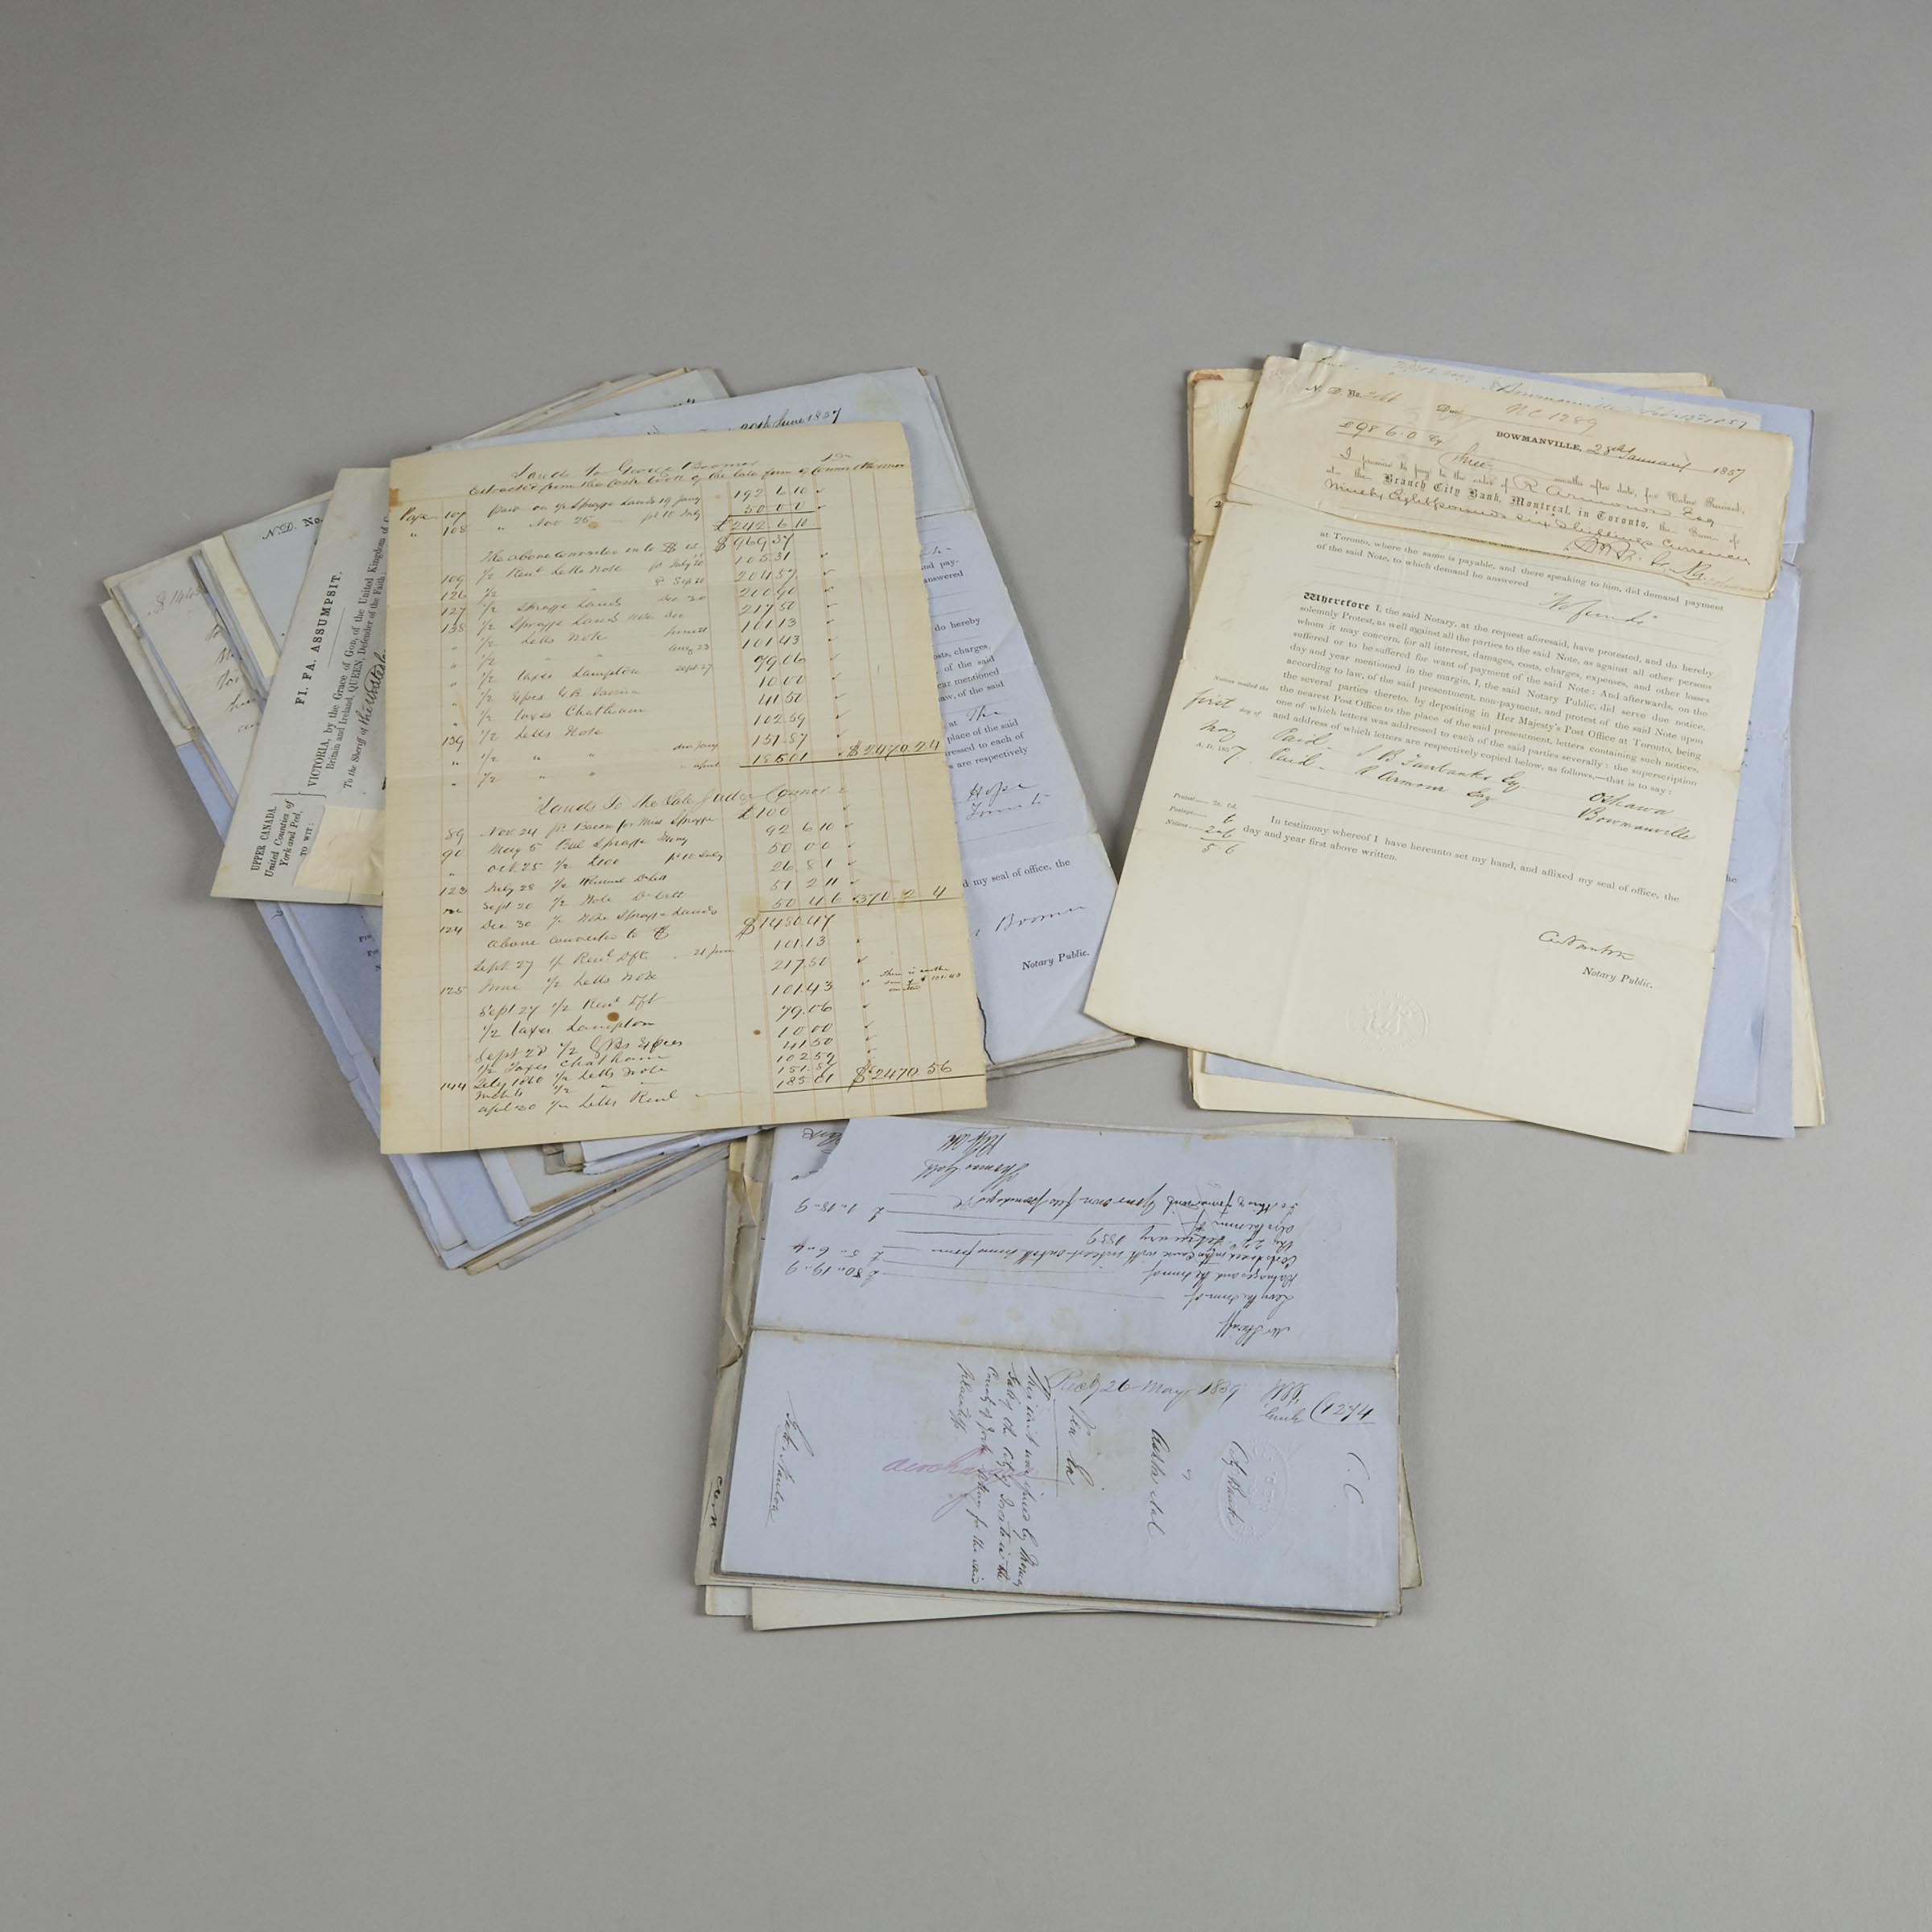 Large Archive of Documents Relating to the Legal Practice of the Honourable Thomas Galt, Toronto, (1815-1901)